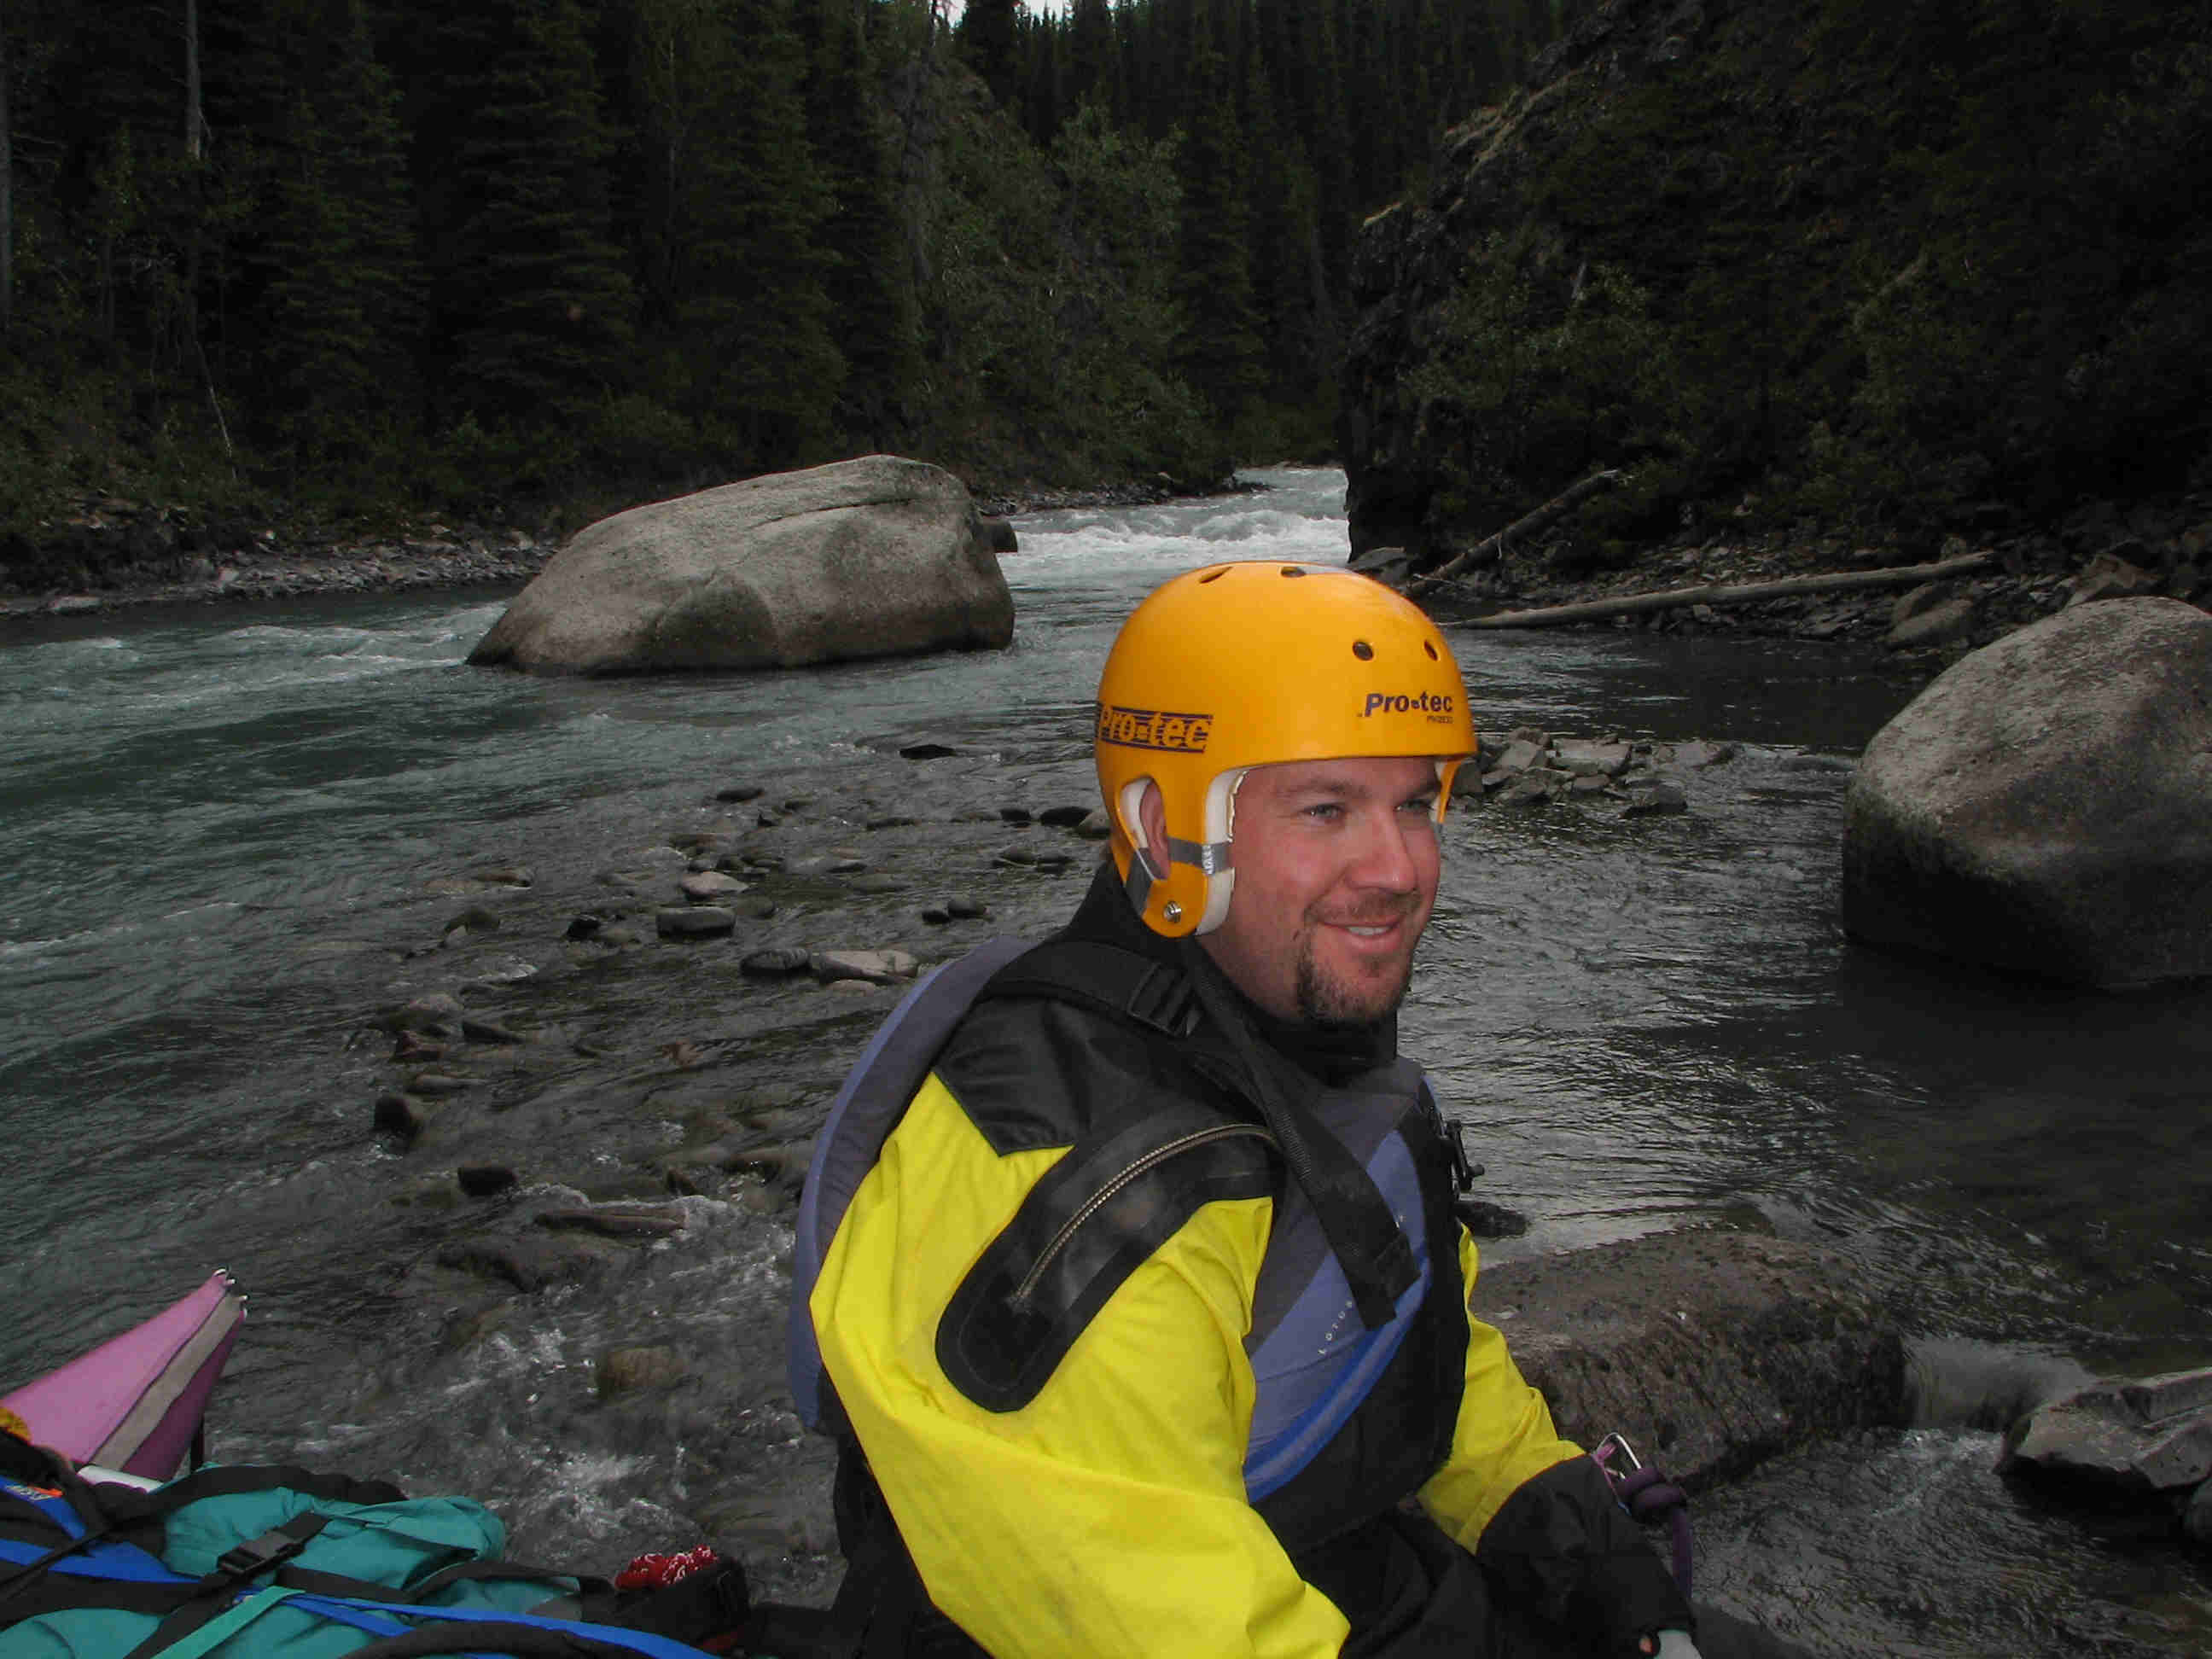 Rest stop below a whitewater rapid on Happy River - Helmet and Drysuit - ALASKA RAFT CONNECTION 